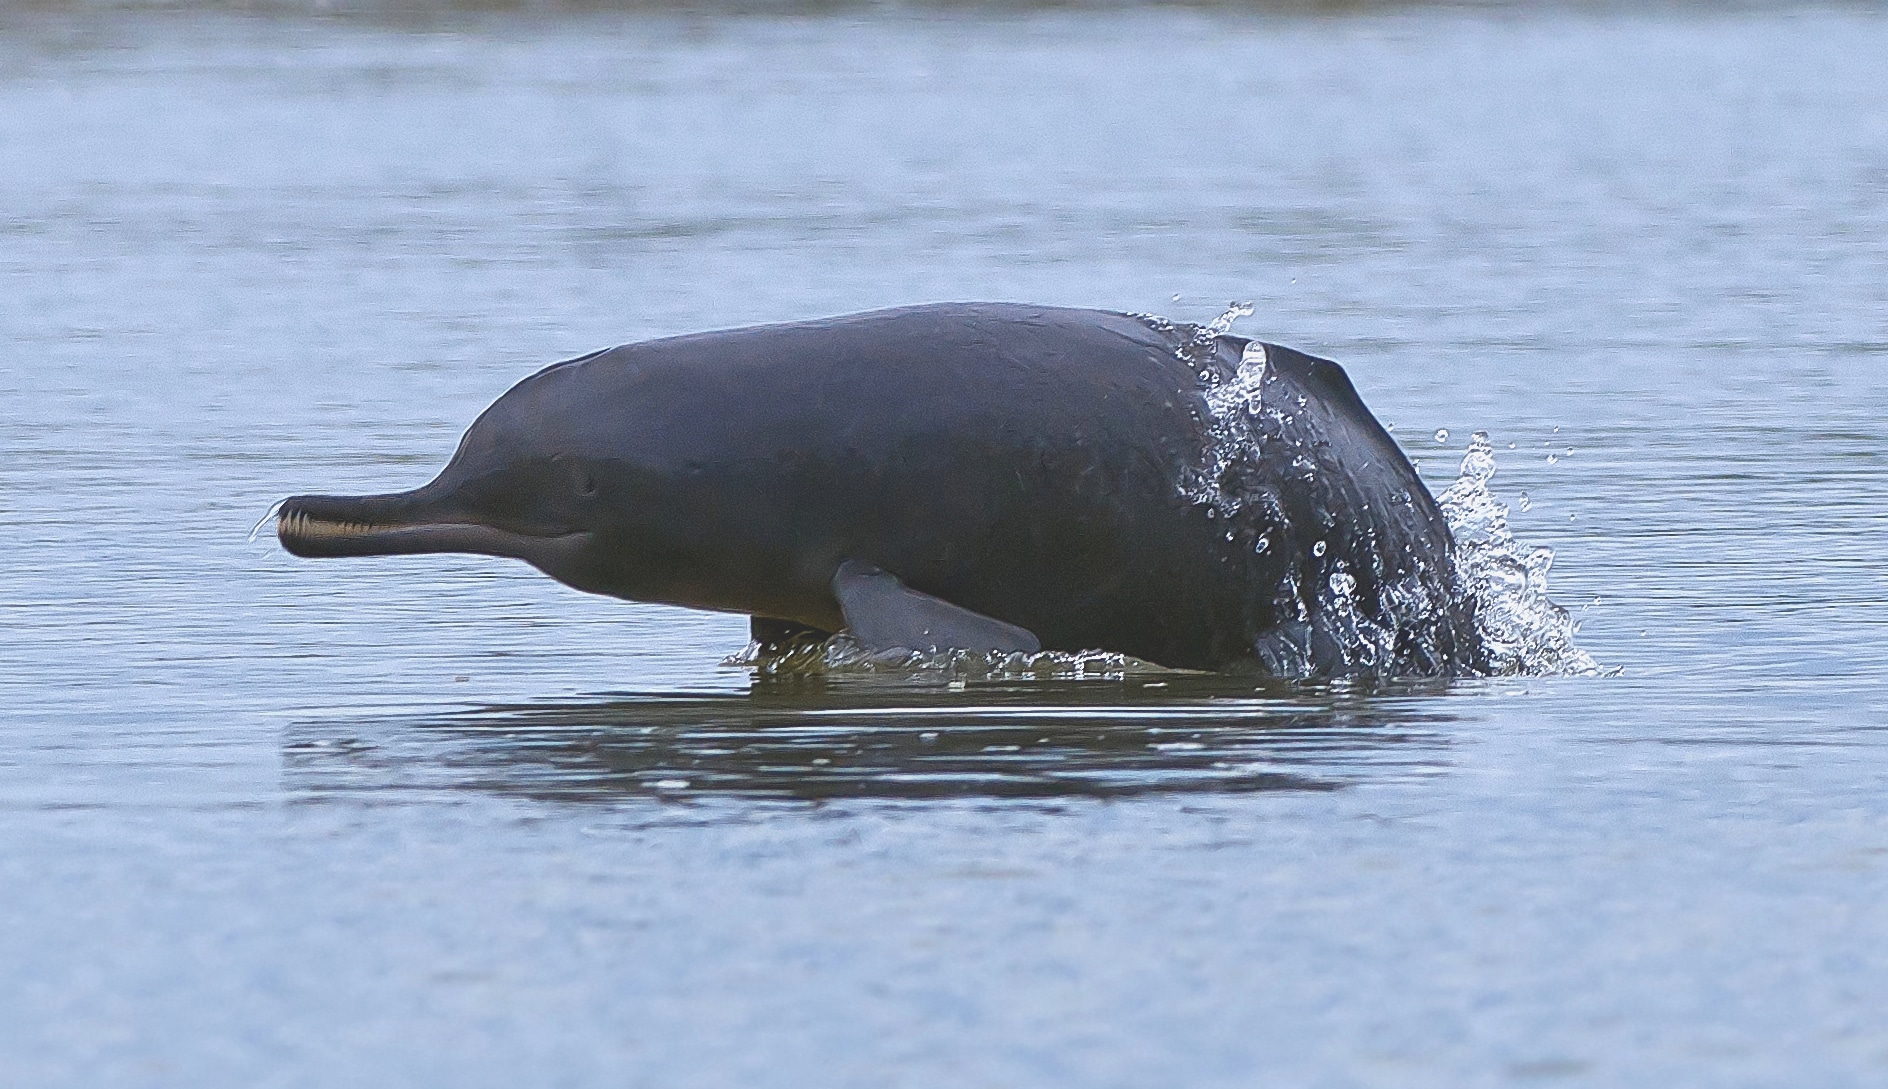 What are the threats to the South Asian river dolphin's habitat?